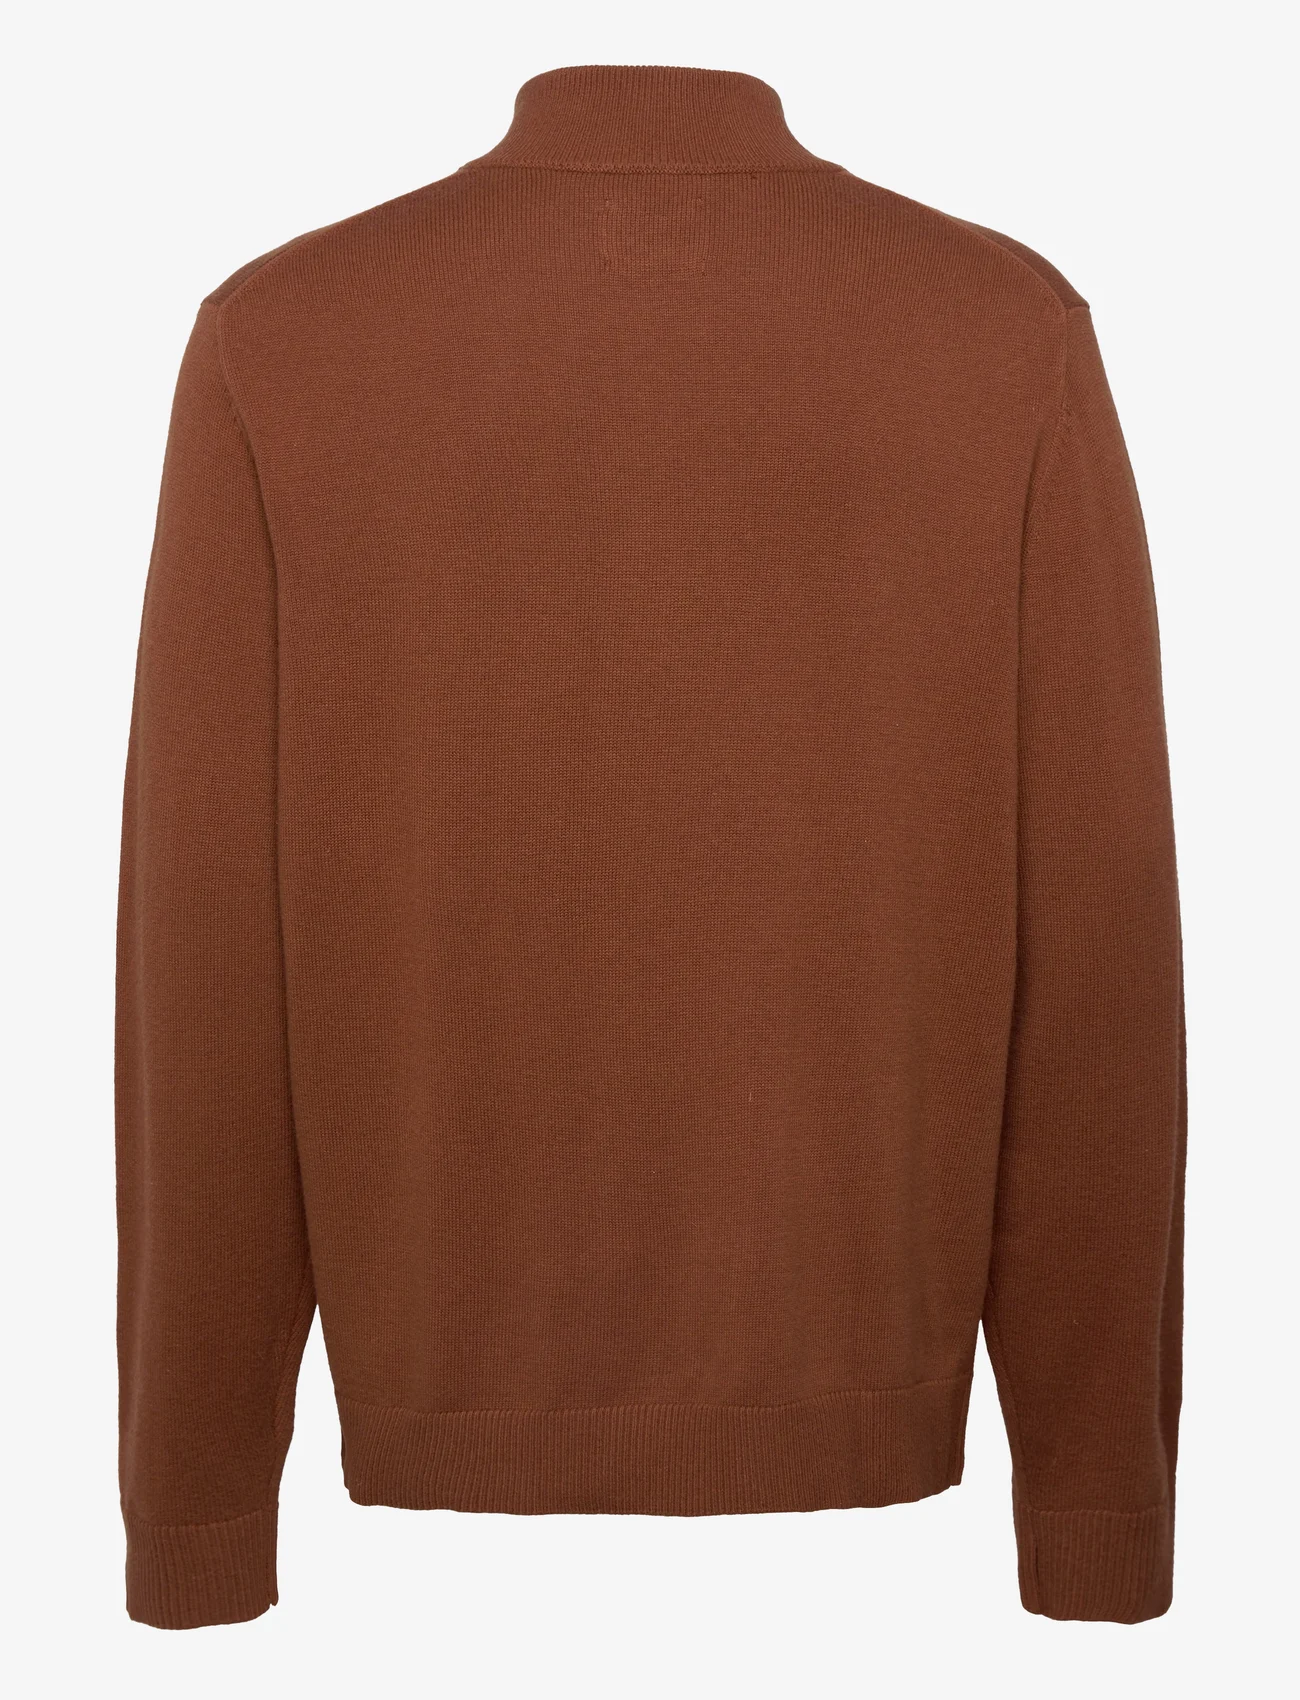 Abercrombie & Fitch - ANF MENS SWEATERS - basic gebreide truien - brown - 1